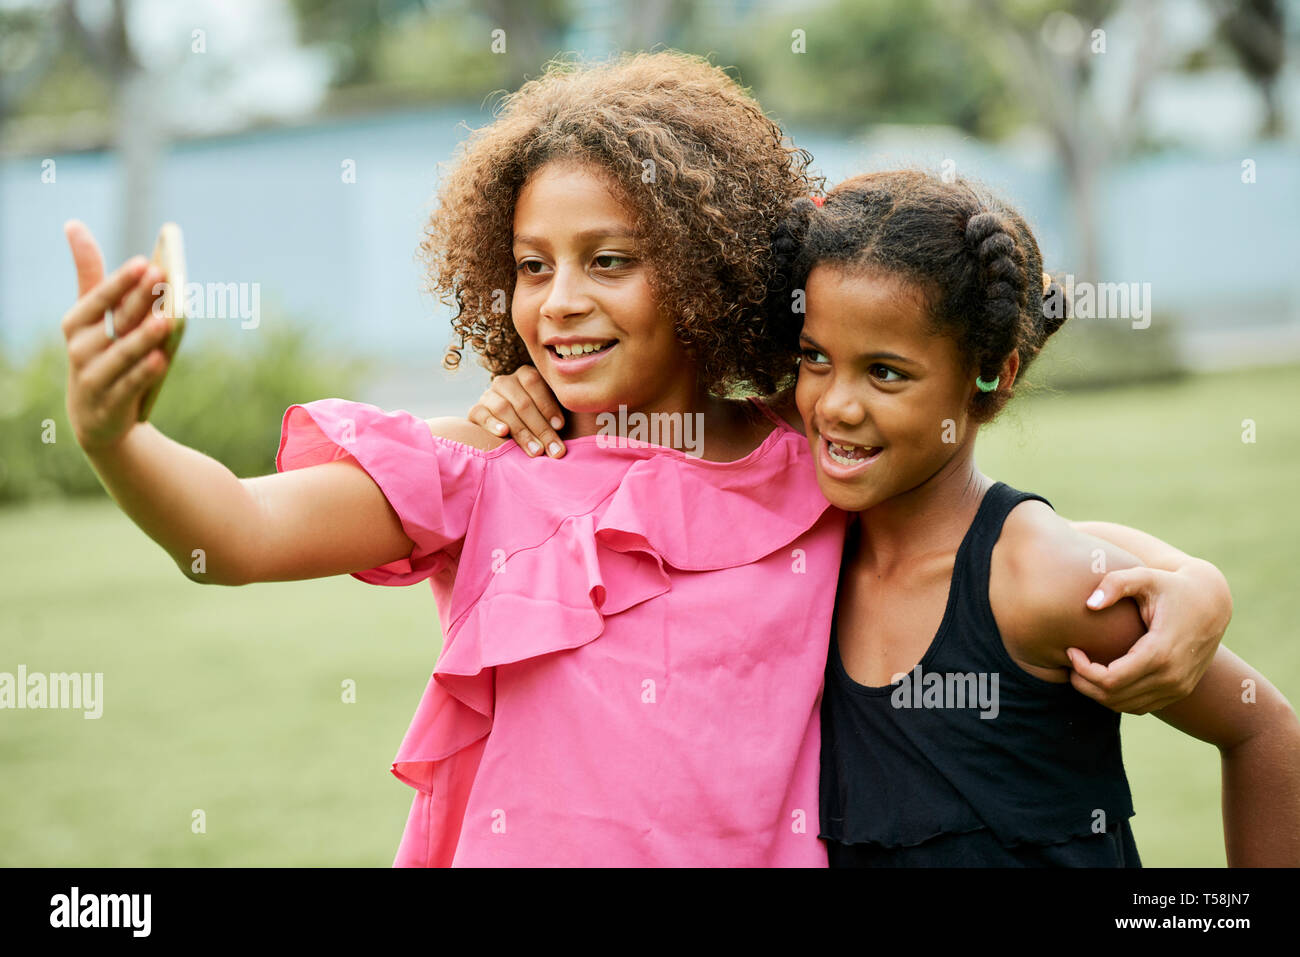 Cheerful African girls photographing together Stock Photo